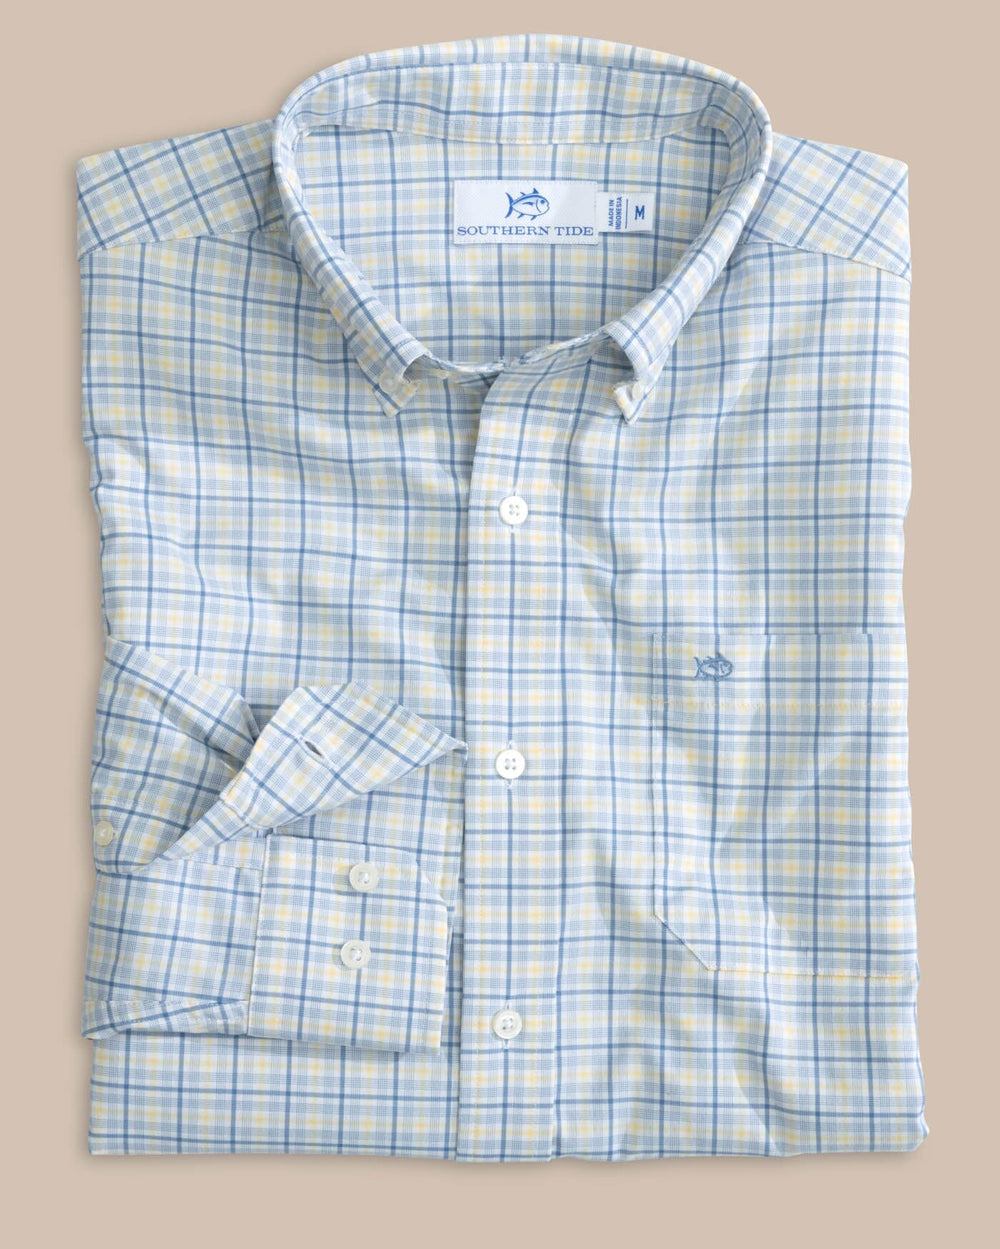 The front view of the Southern Tide Intercoastal Falls Park Plaid Long Sleeve SportShirt by Southern Tide - Coronet Blue